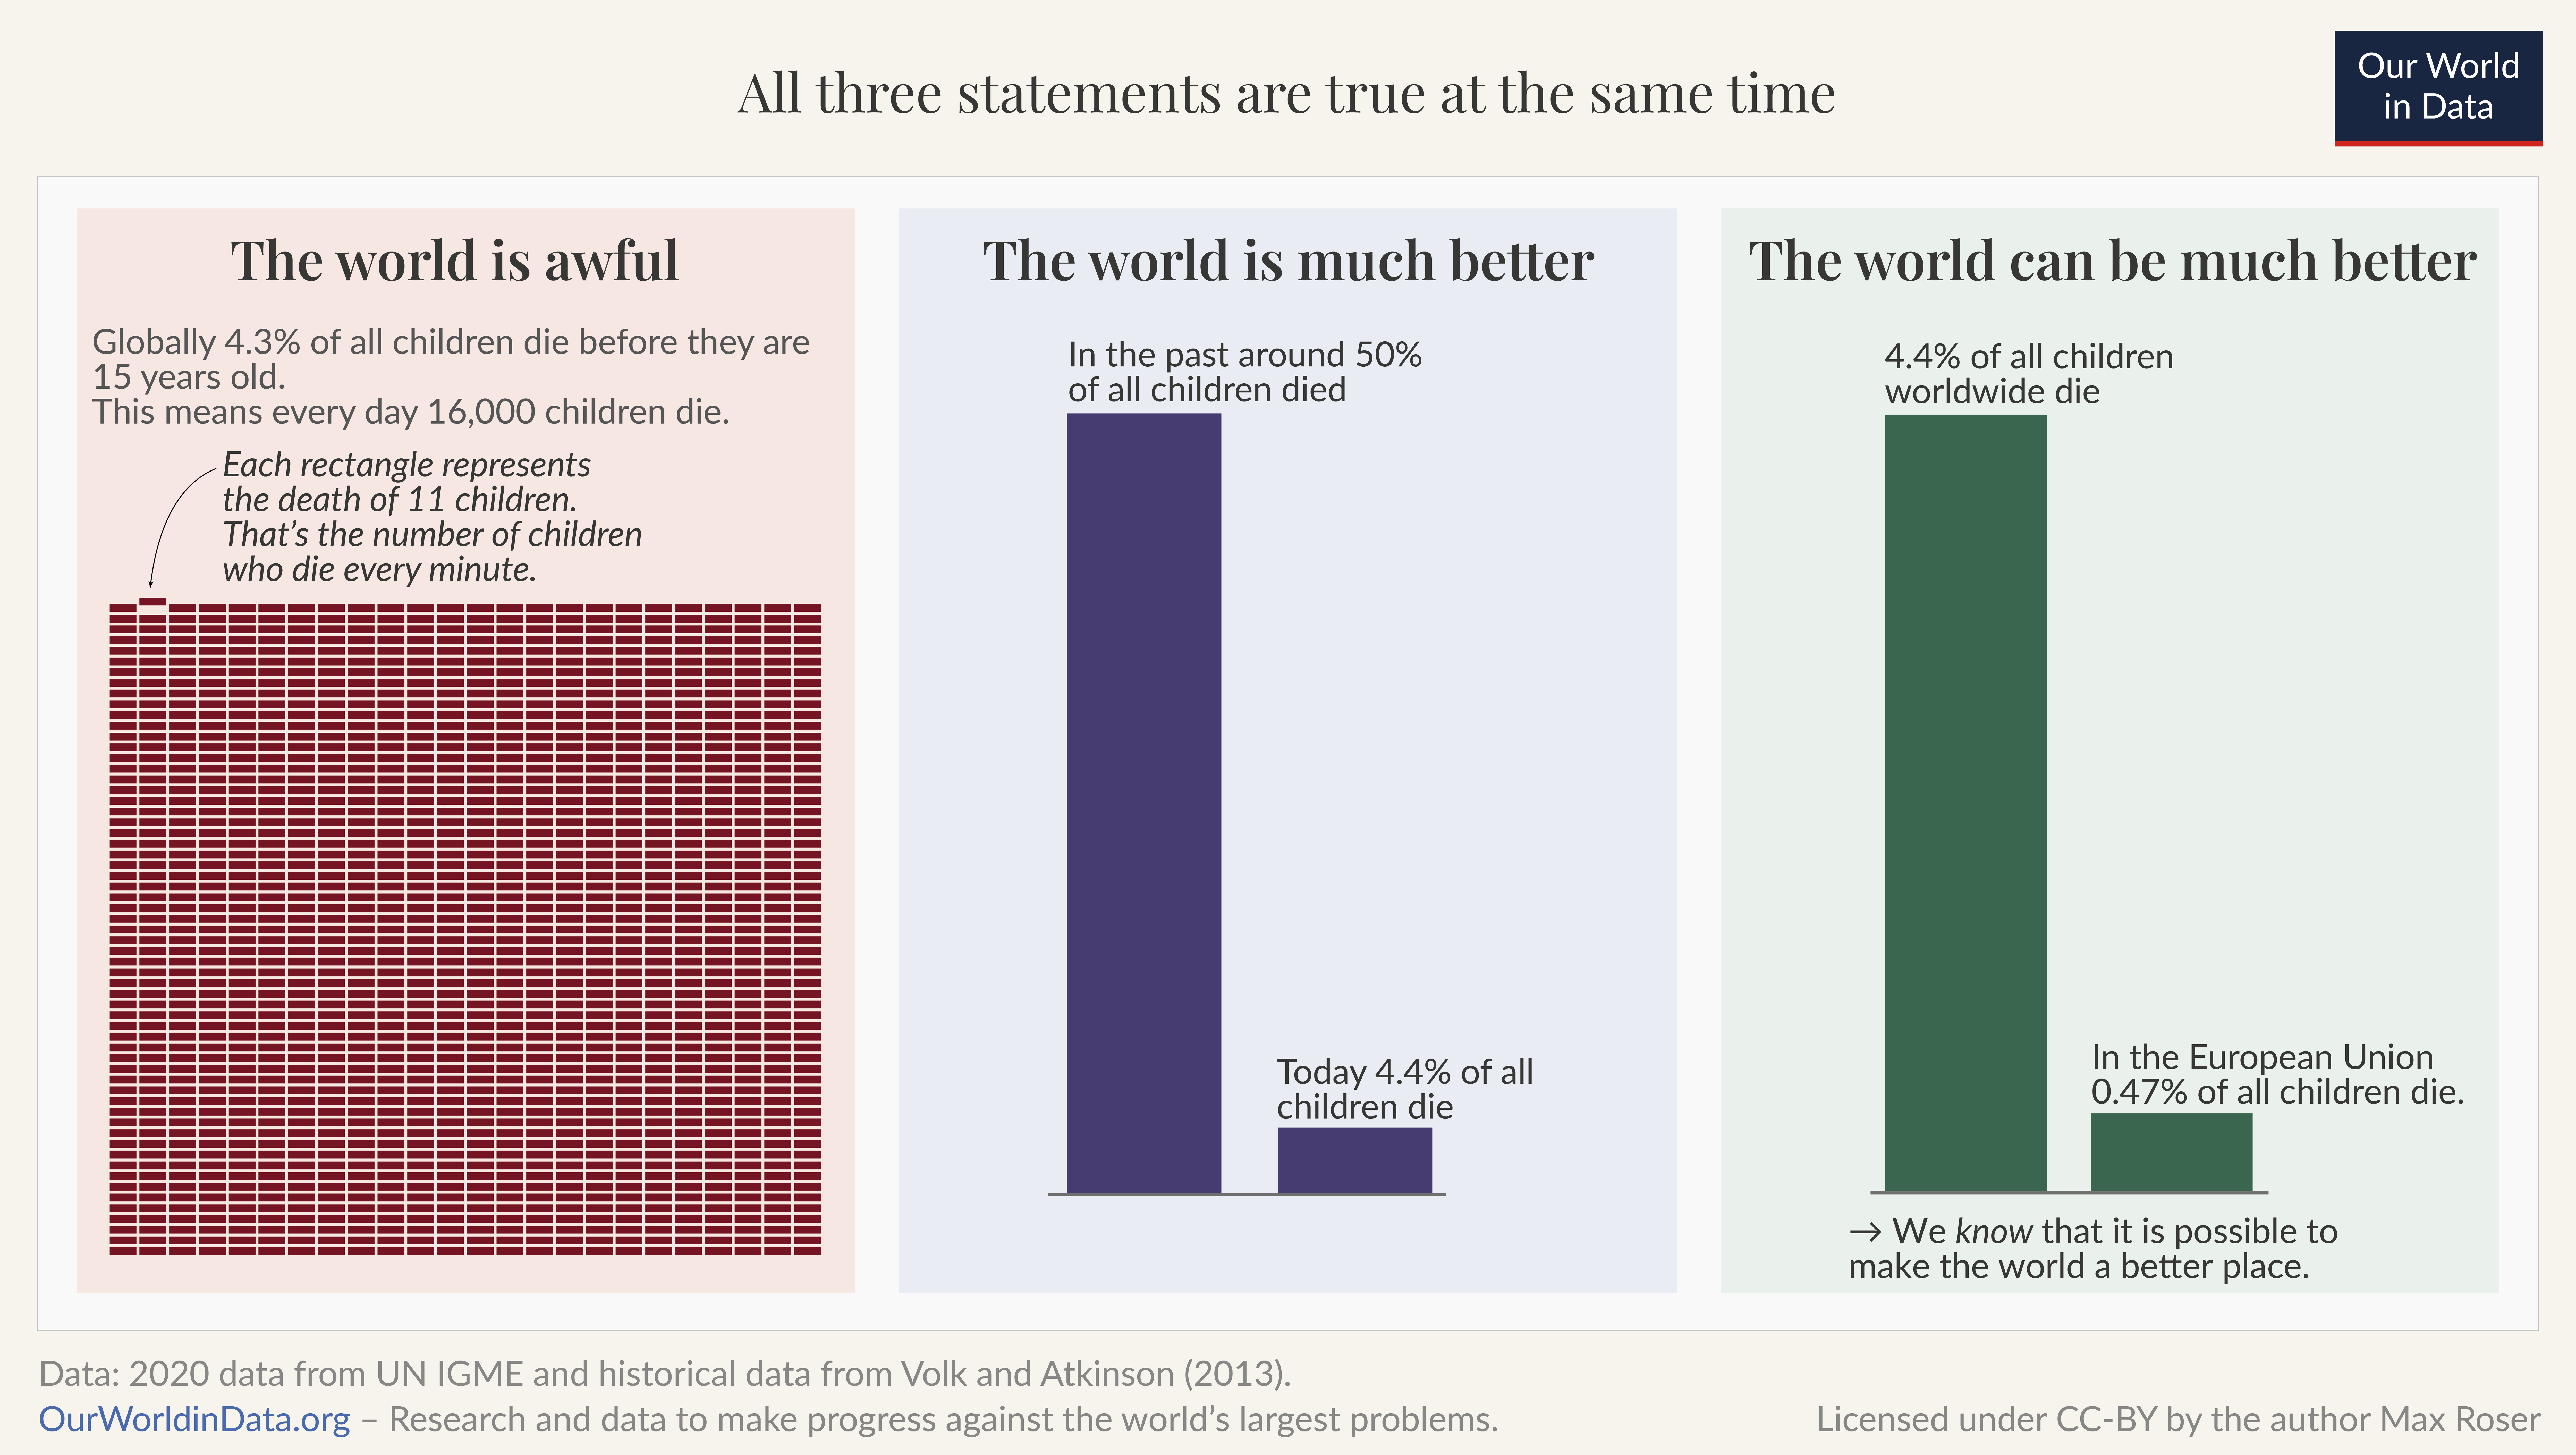 A summary chart that shows all three previous charts at once — and says at the top ‘All three statements are true at the same time’